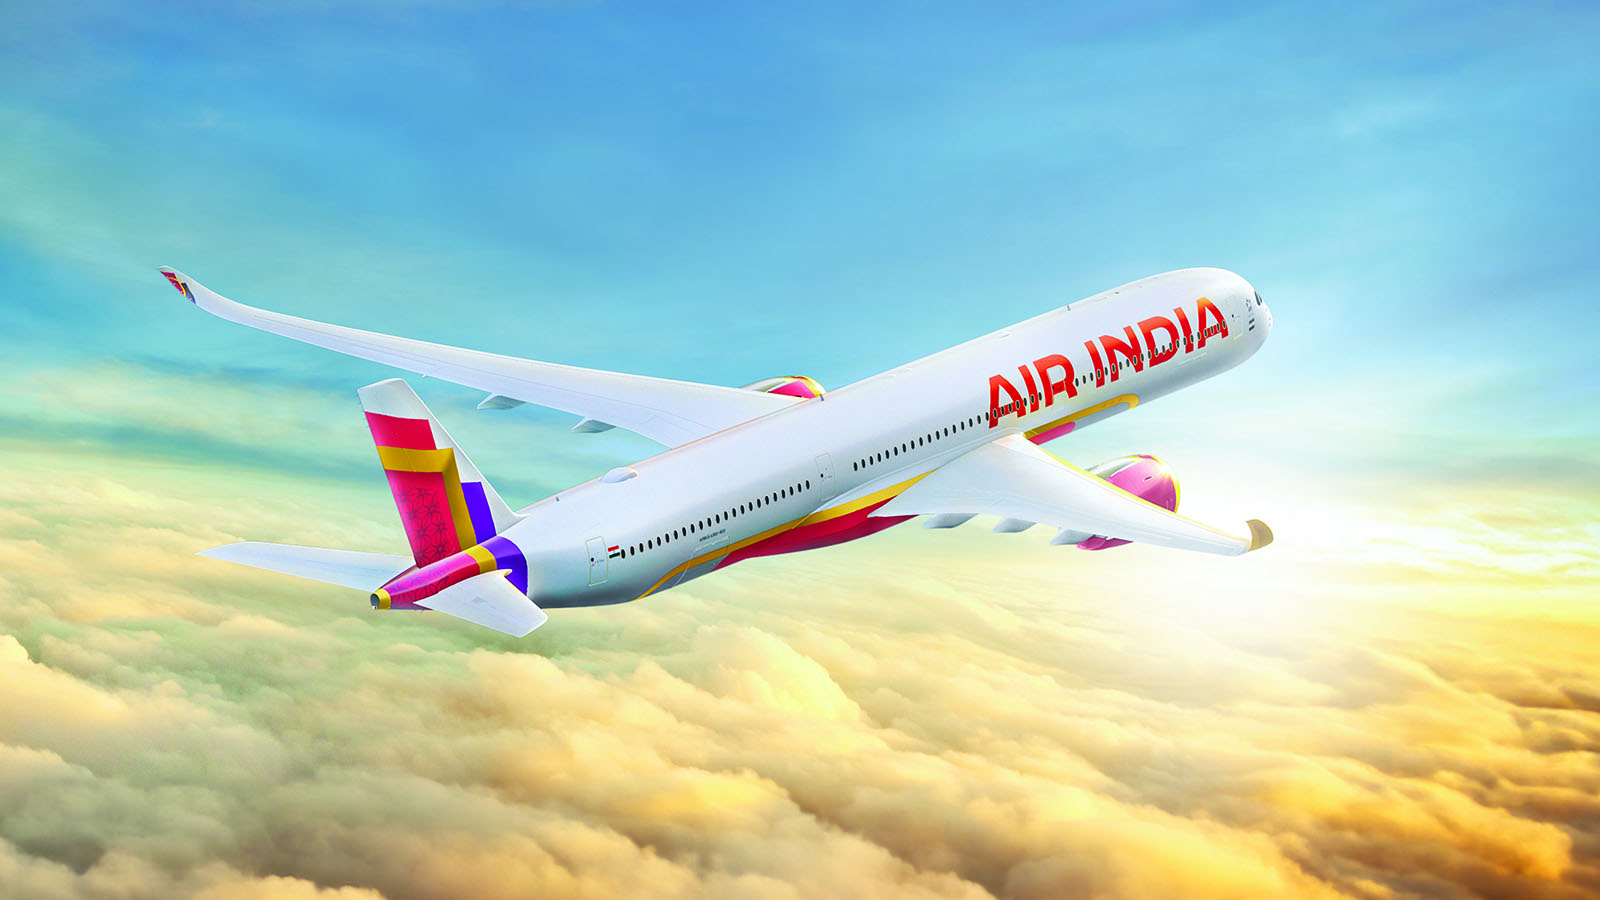 New Air India logo on new plane